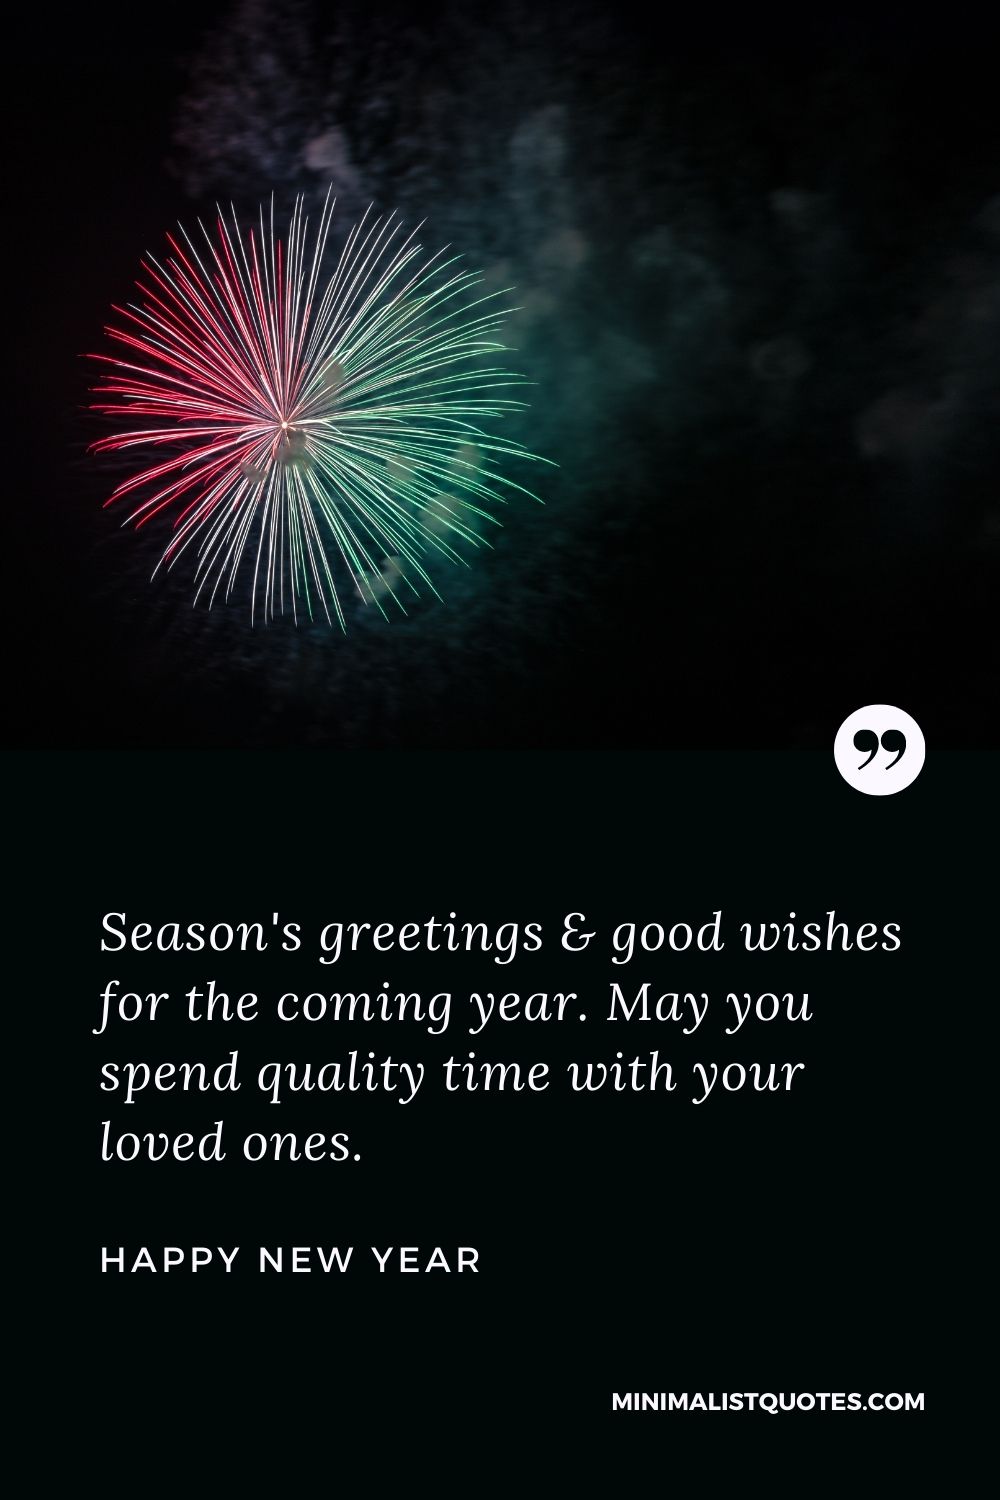 New Year Wish - Season's greetings & good wishes for the coming year. May you spend quality time with your loved ones.